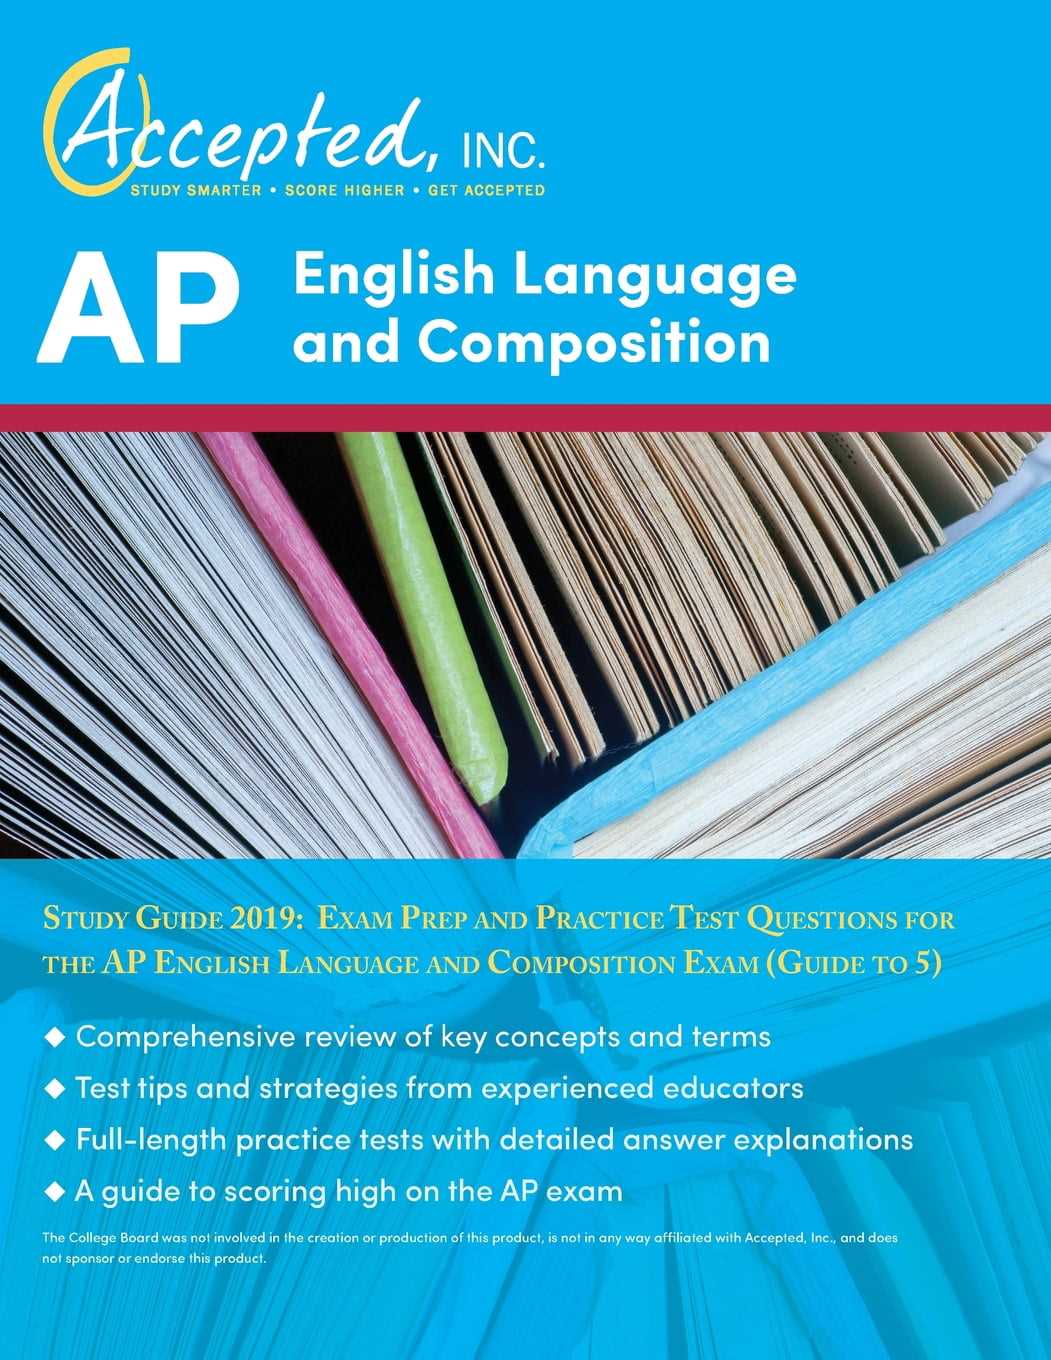 Overview of the AP English Language Exam